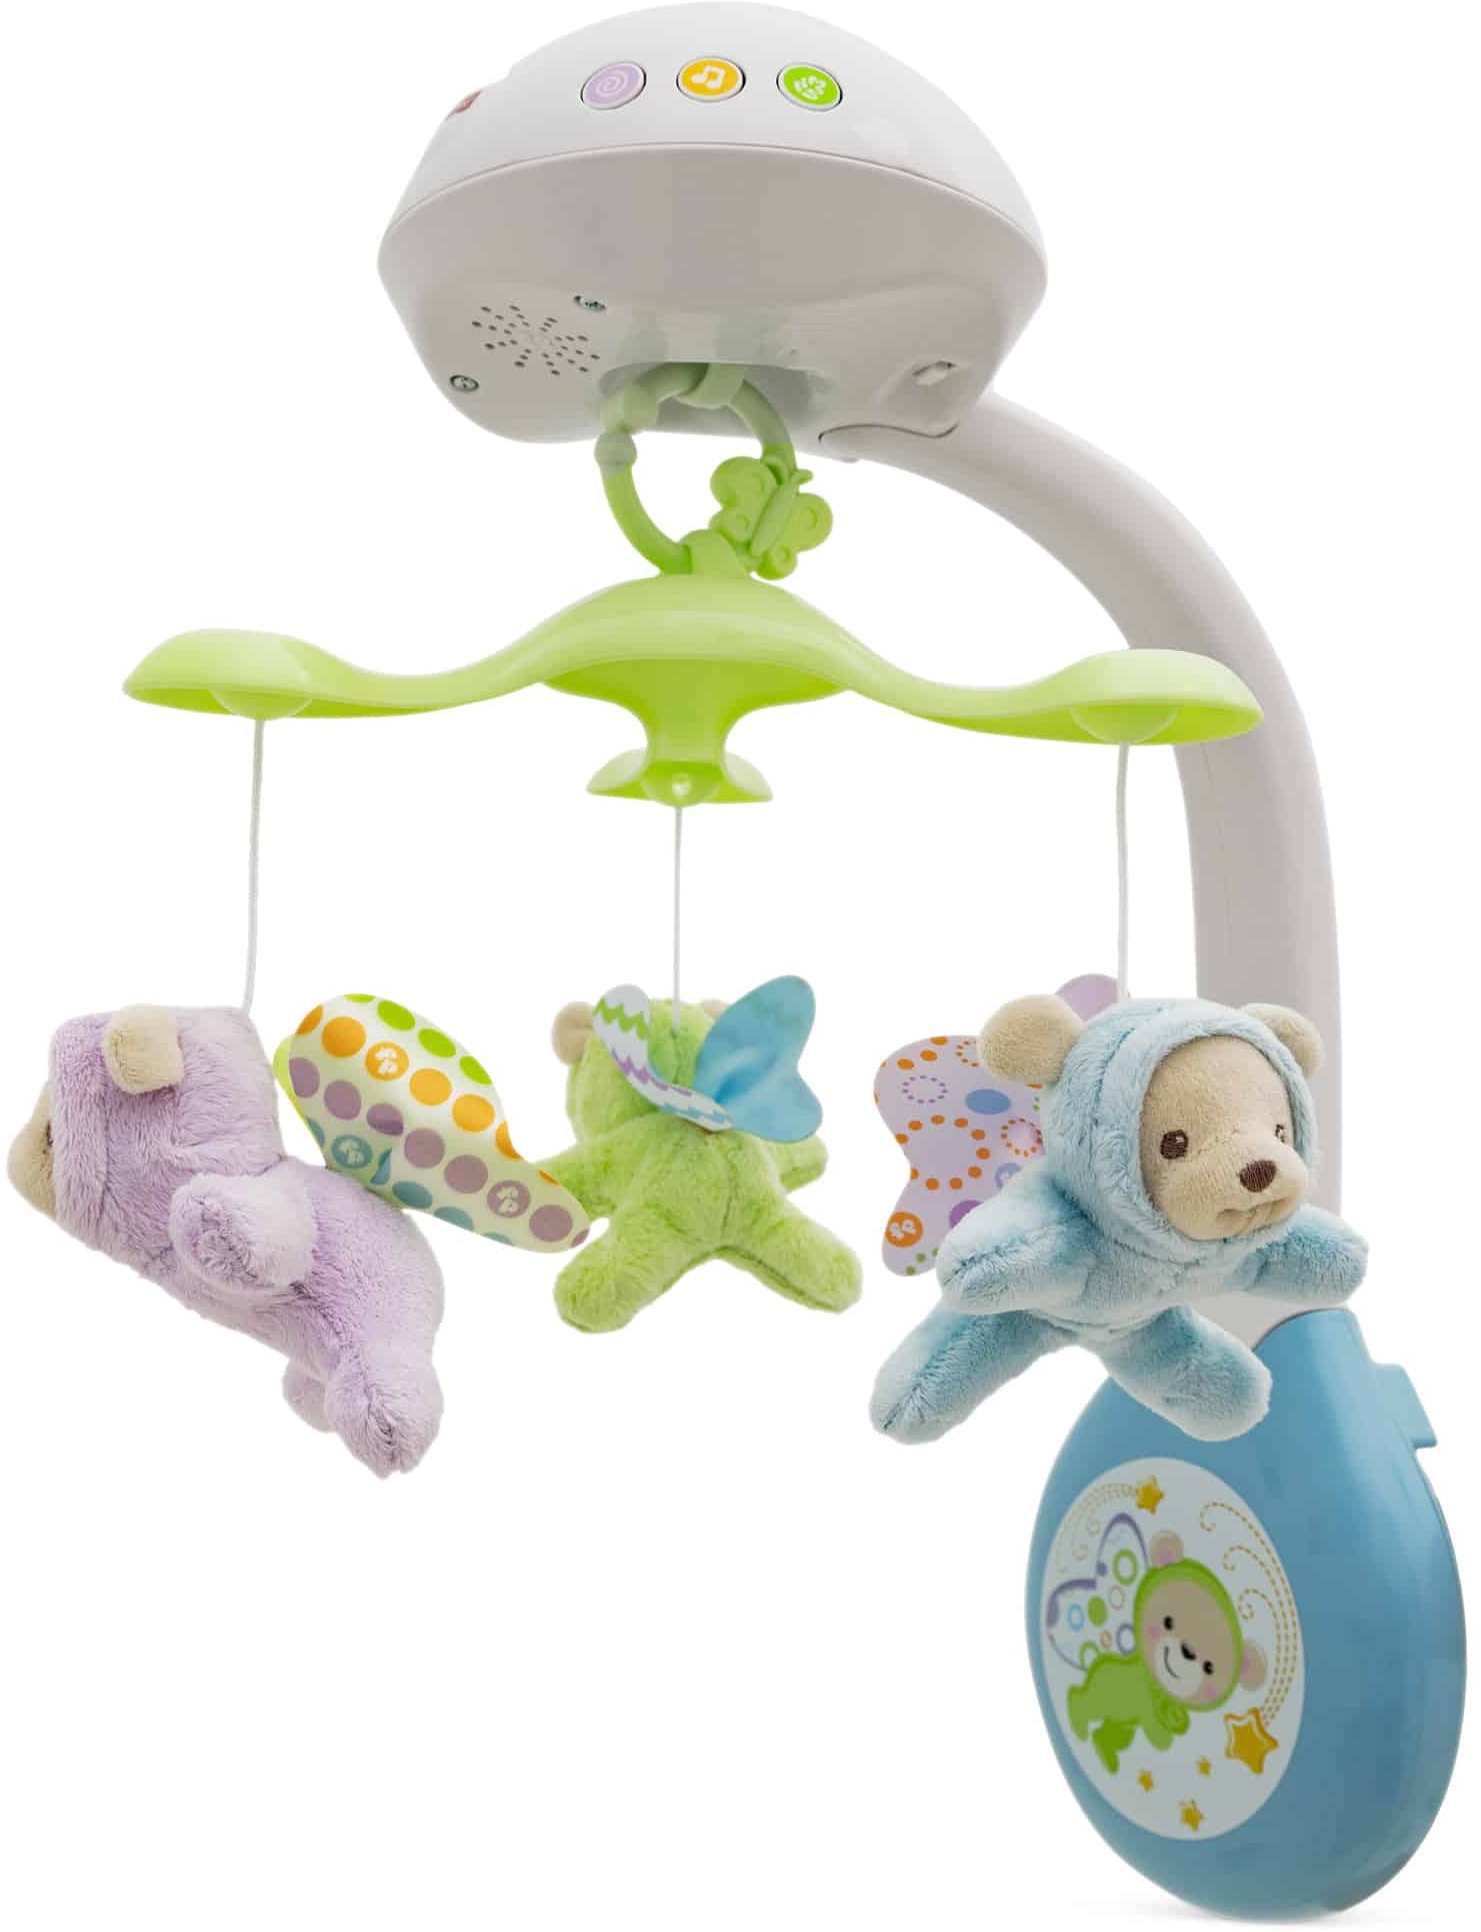 Fisher Price 3-in-1 Traumbärchen Mobile